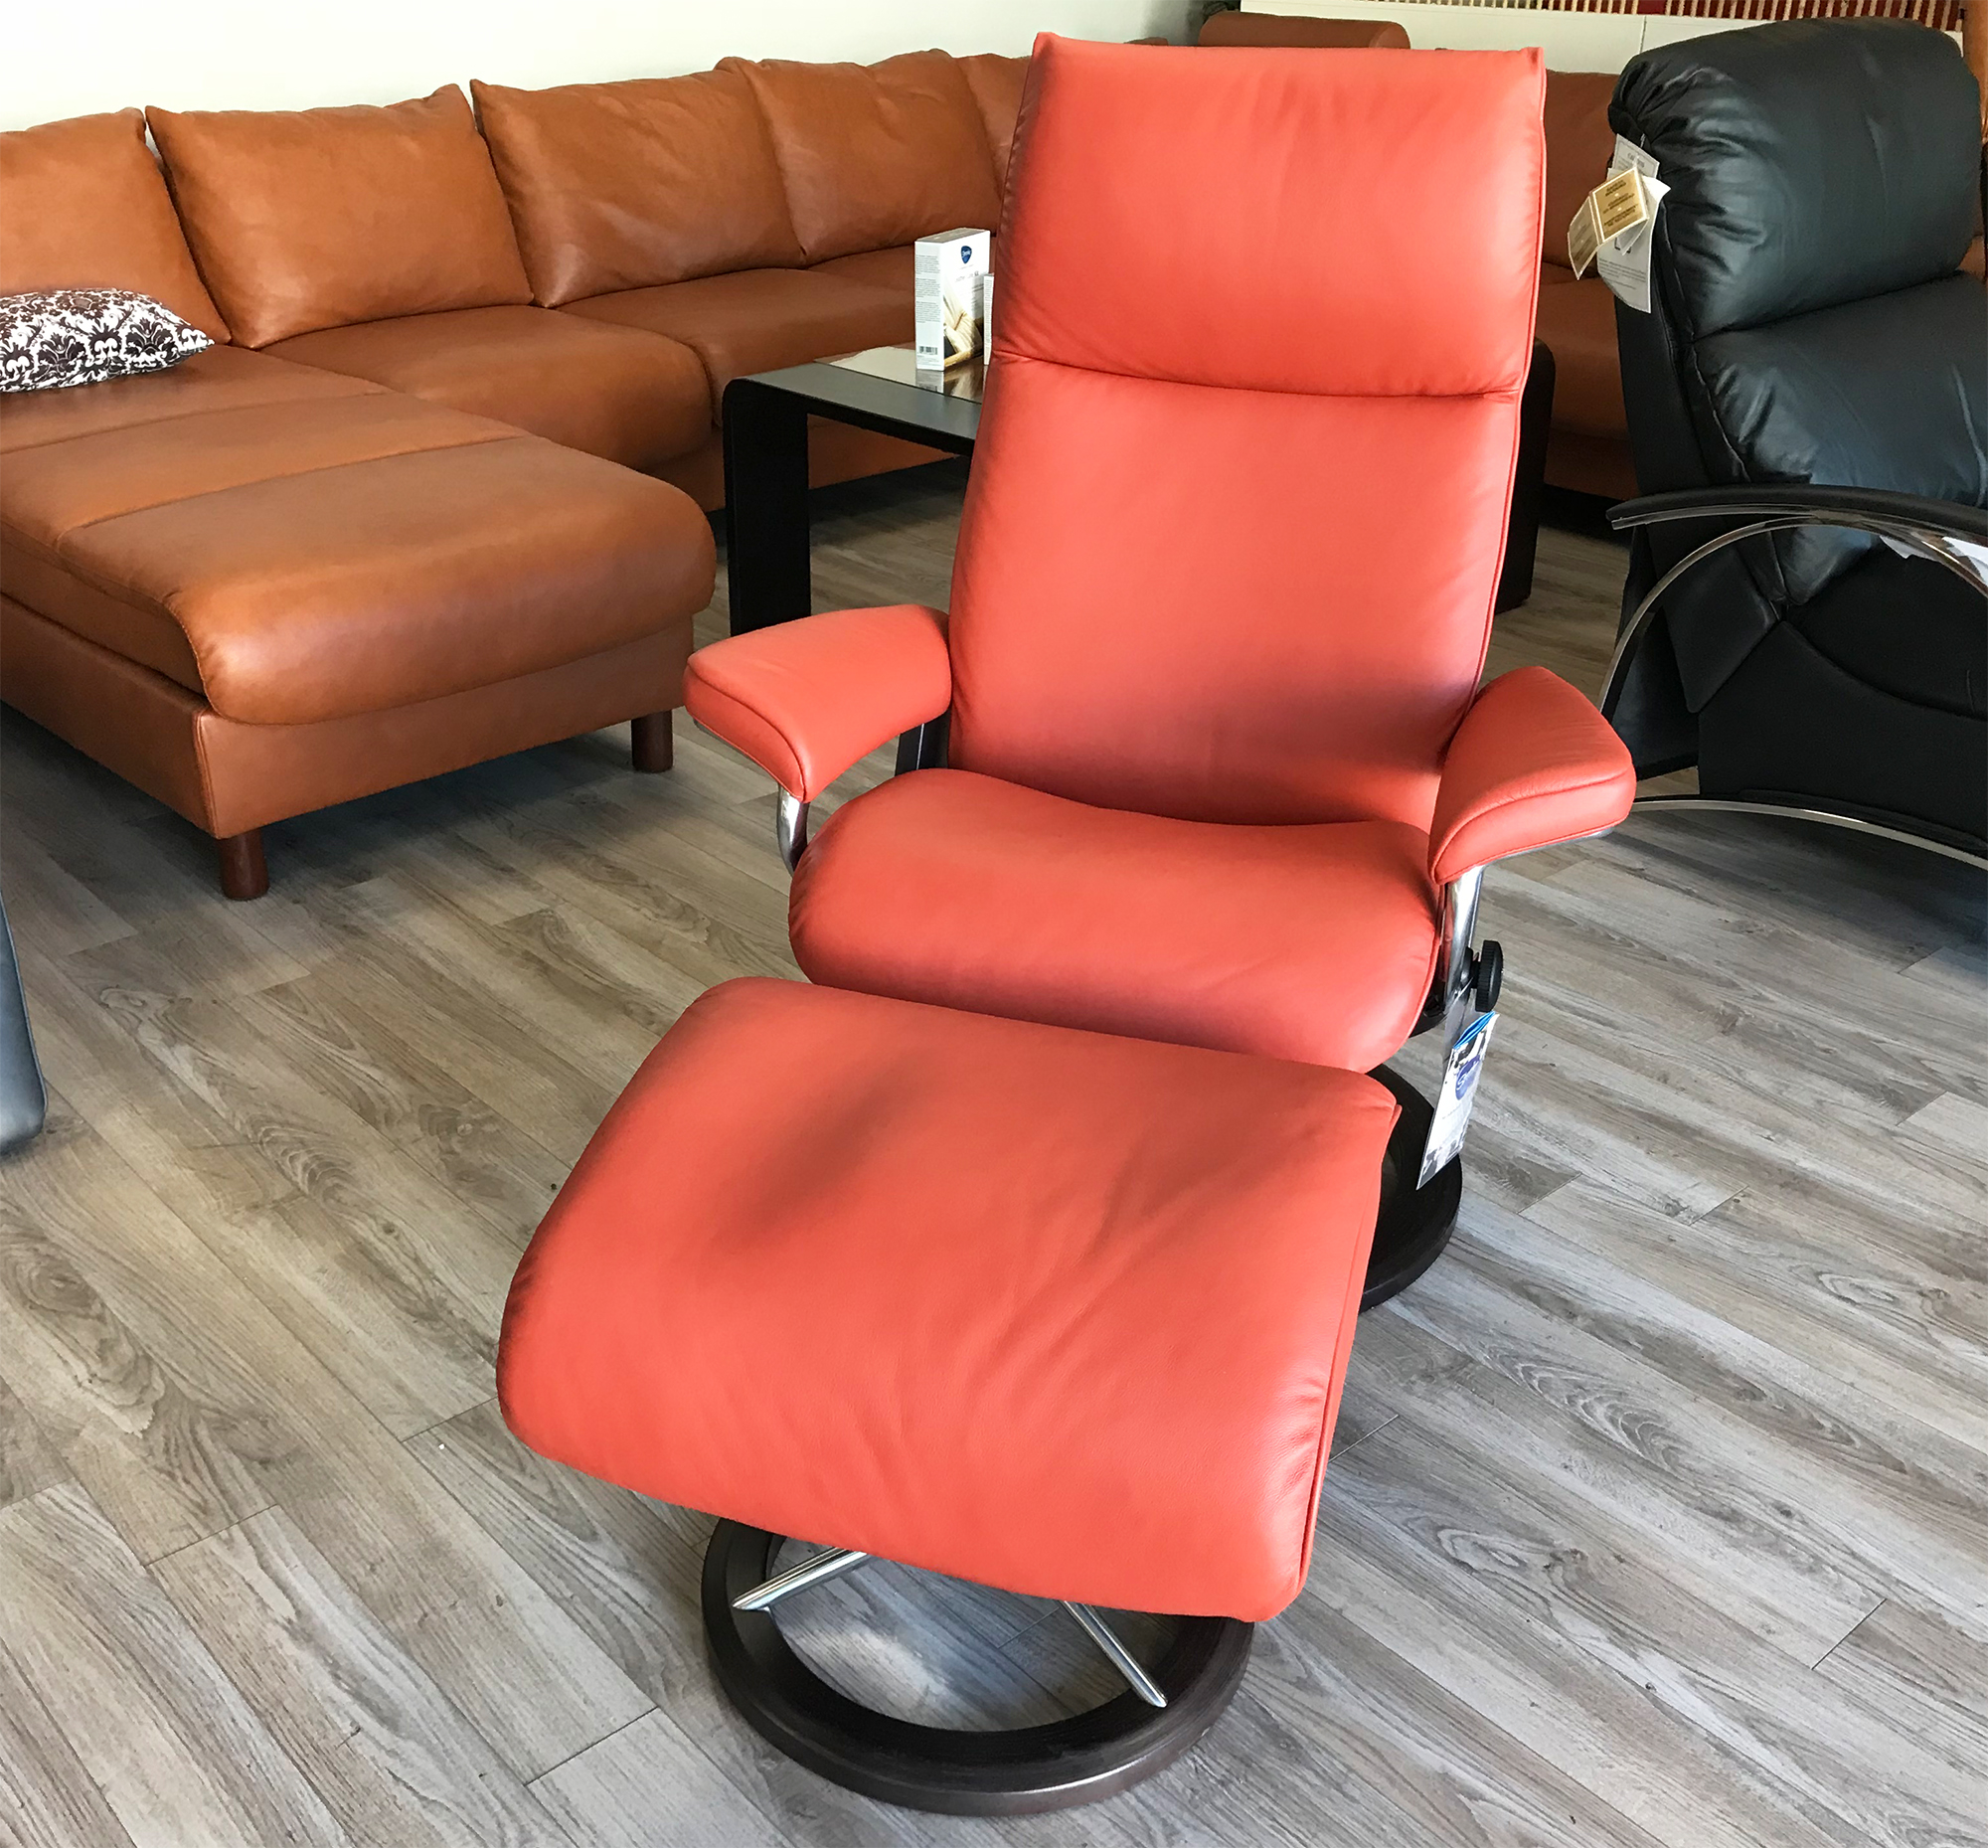 Stressless Aura Signature Base Chair Ekornes Paloma Leather and Stressless Ottoman Leather Henna Recliner Aura Base Henna Recliners by Chairs Paloma Signature 